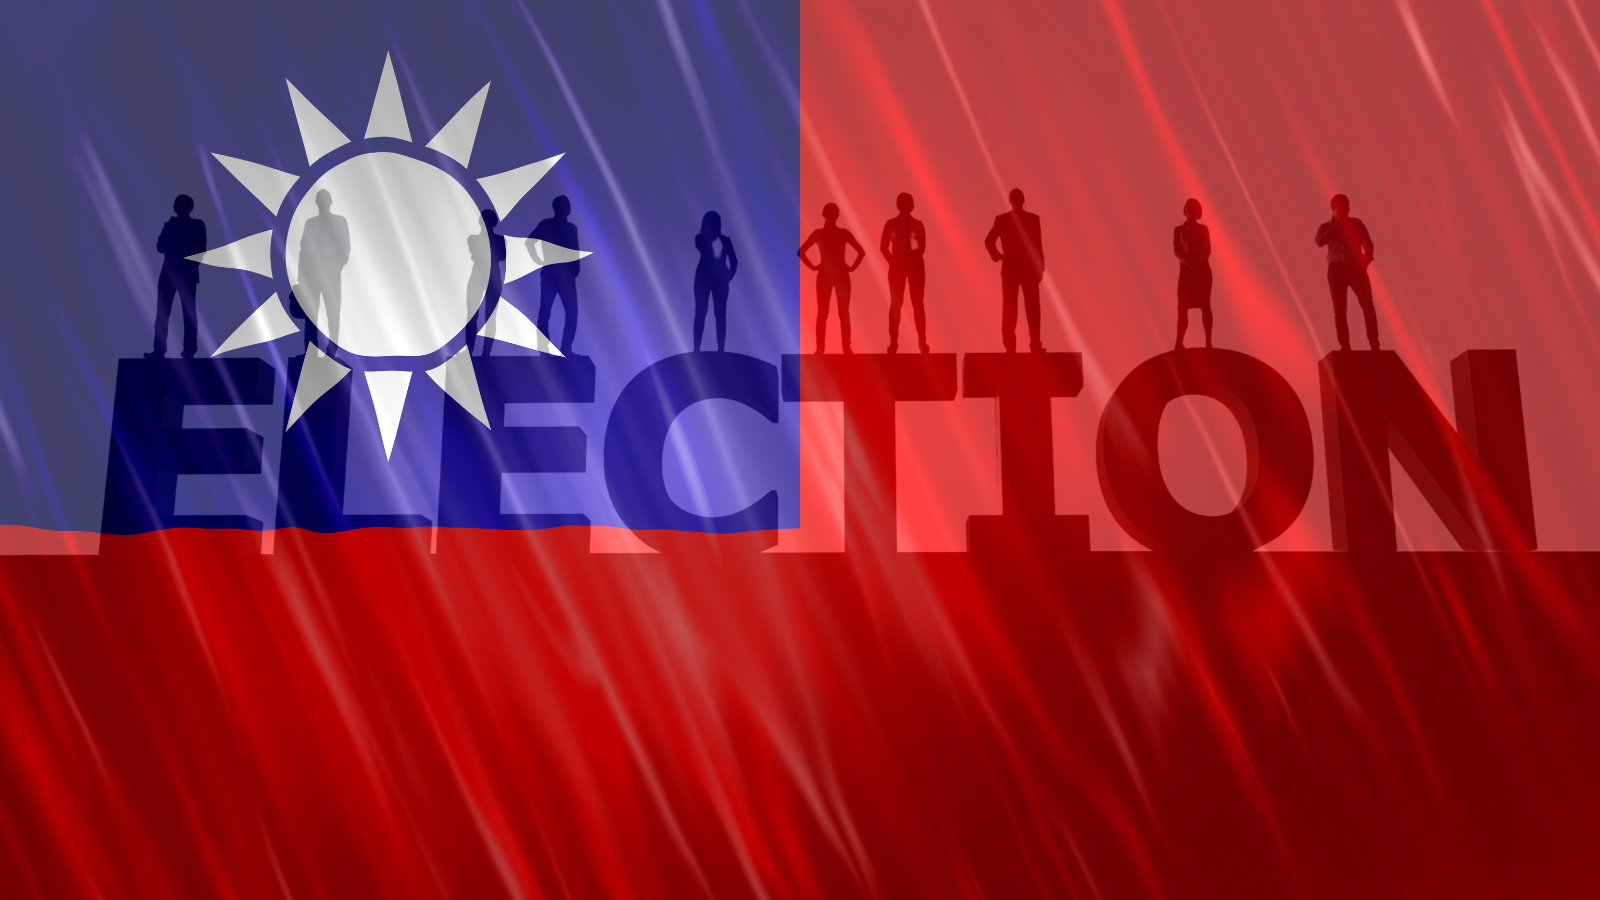 Balancing and partnering – Why we should pay attention to Taiwan’s vice-presidential candidates